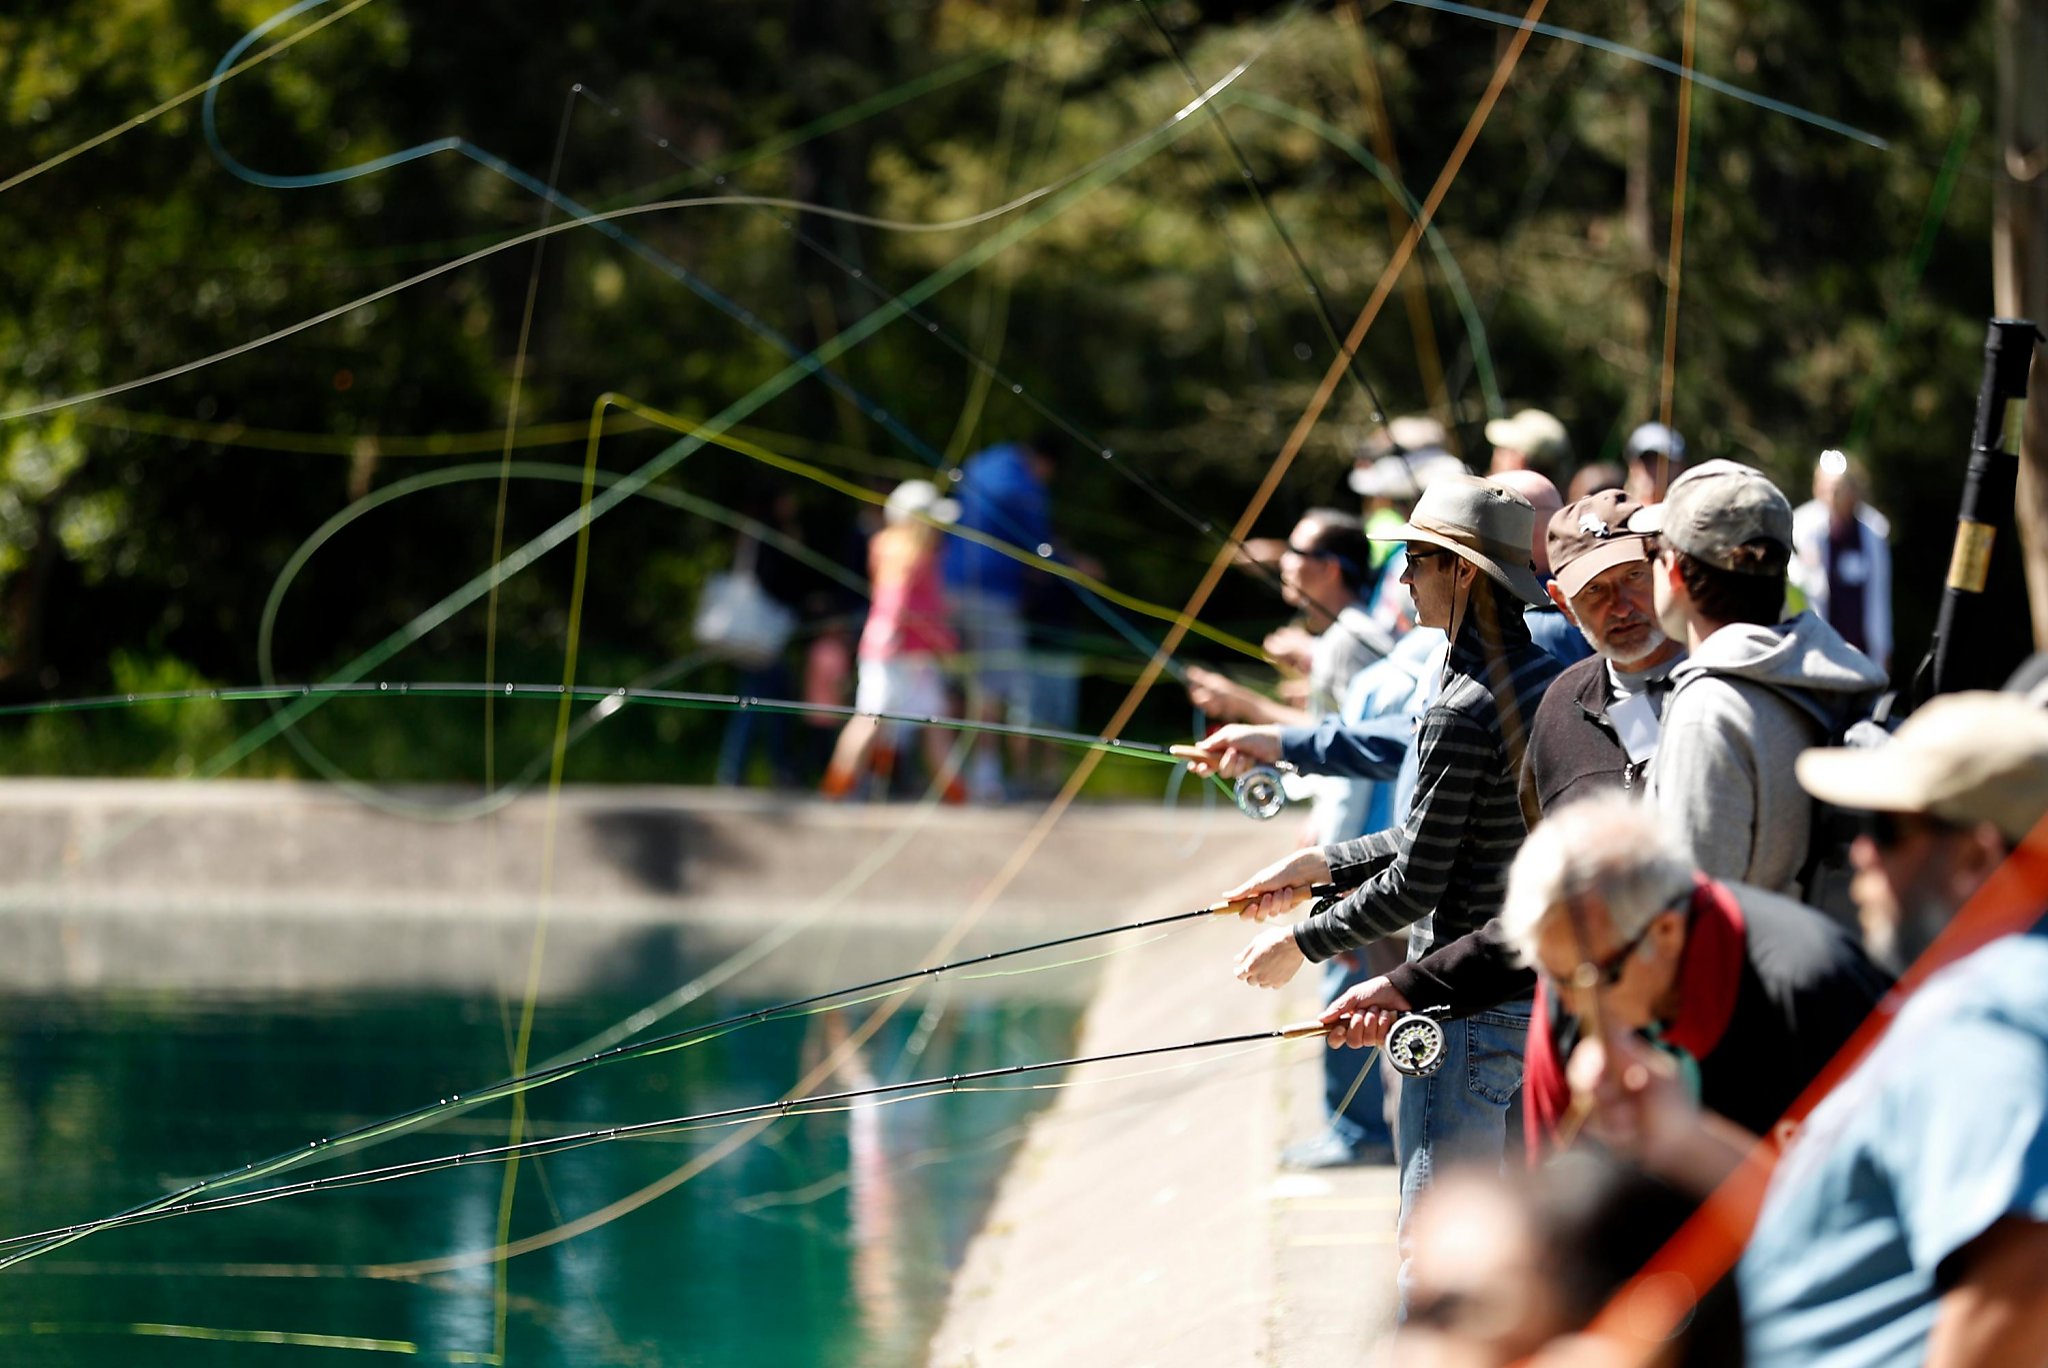 Golden Gate Park fly-fishing club celebrates 85th anniversary